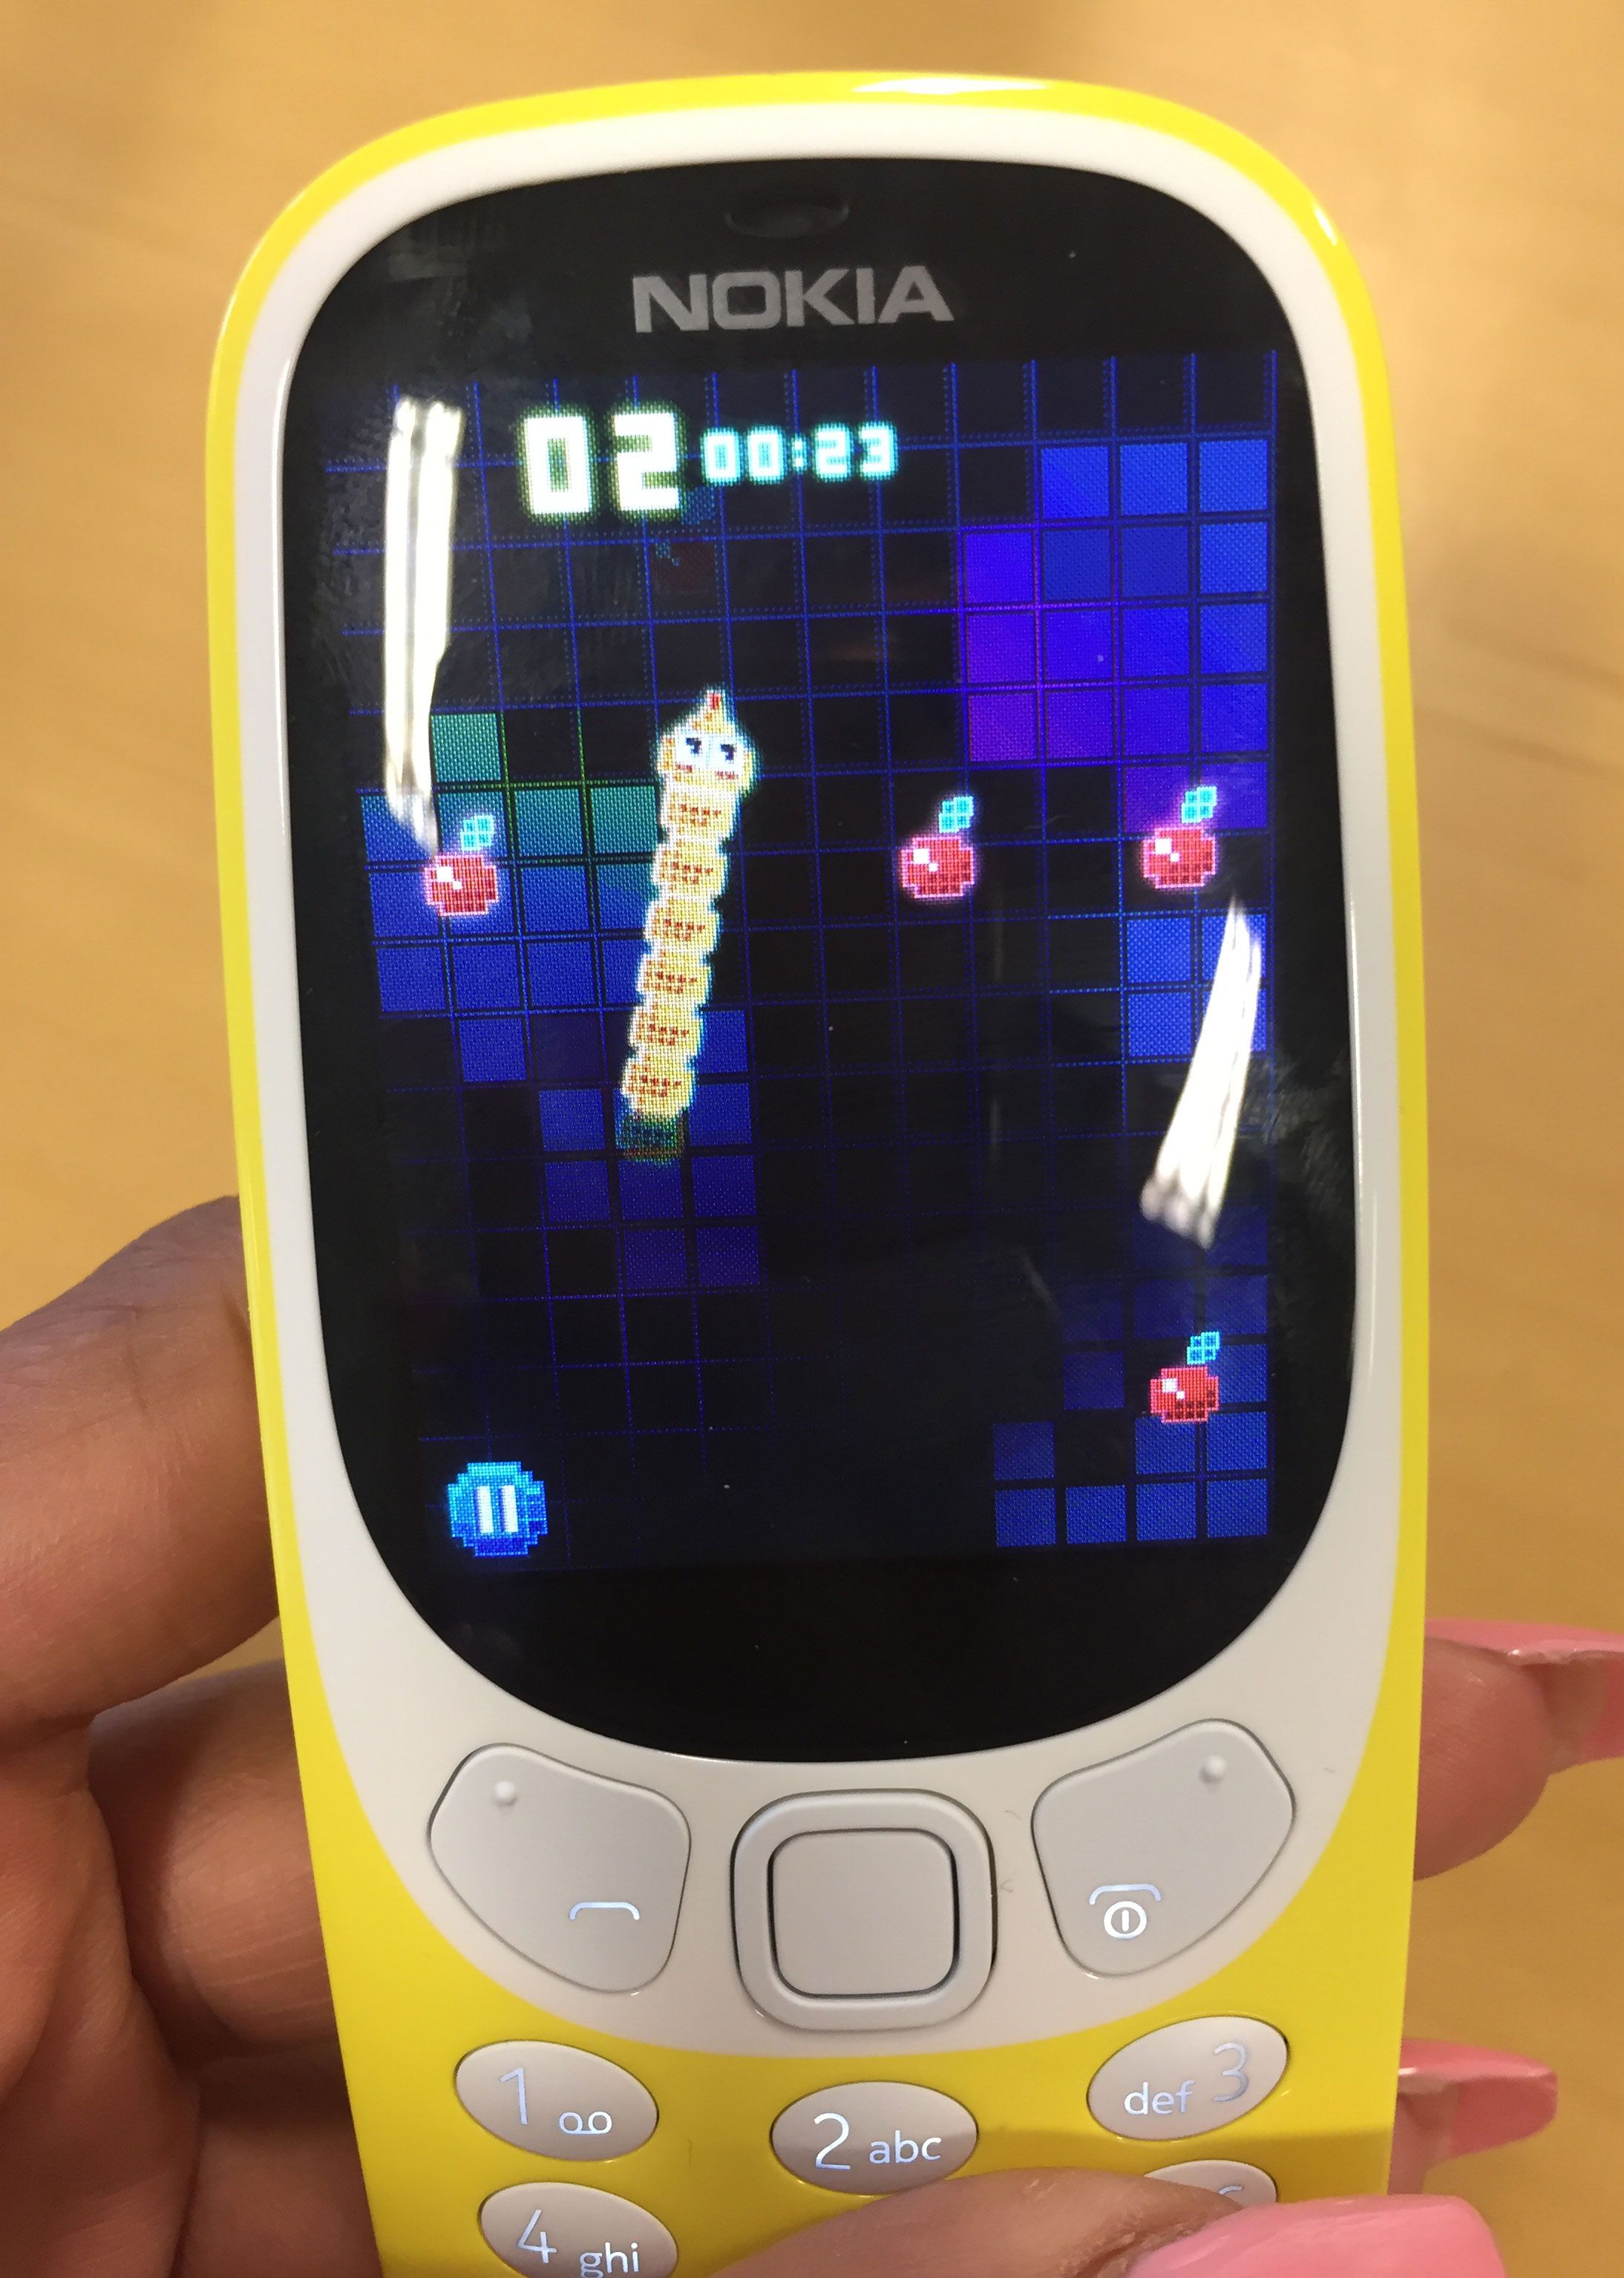 Classic Nokia phones are 33% off as it's Snake's 25th birthday